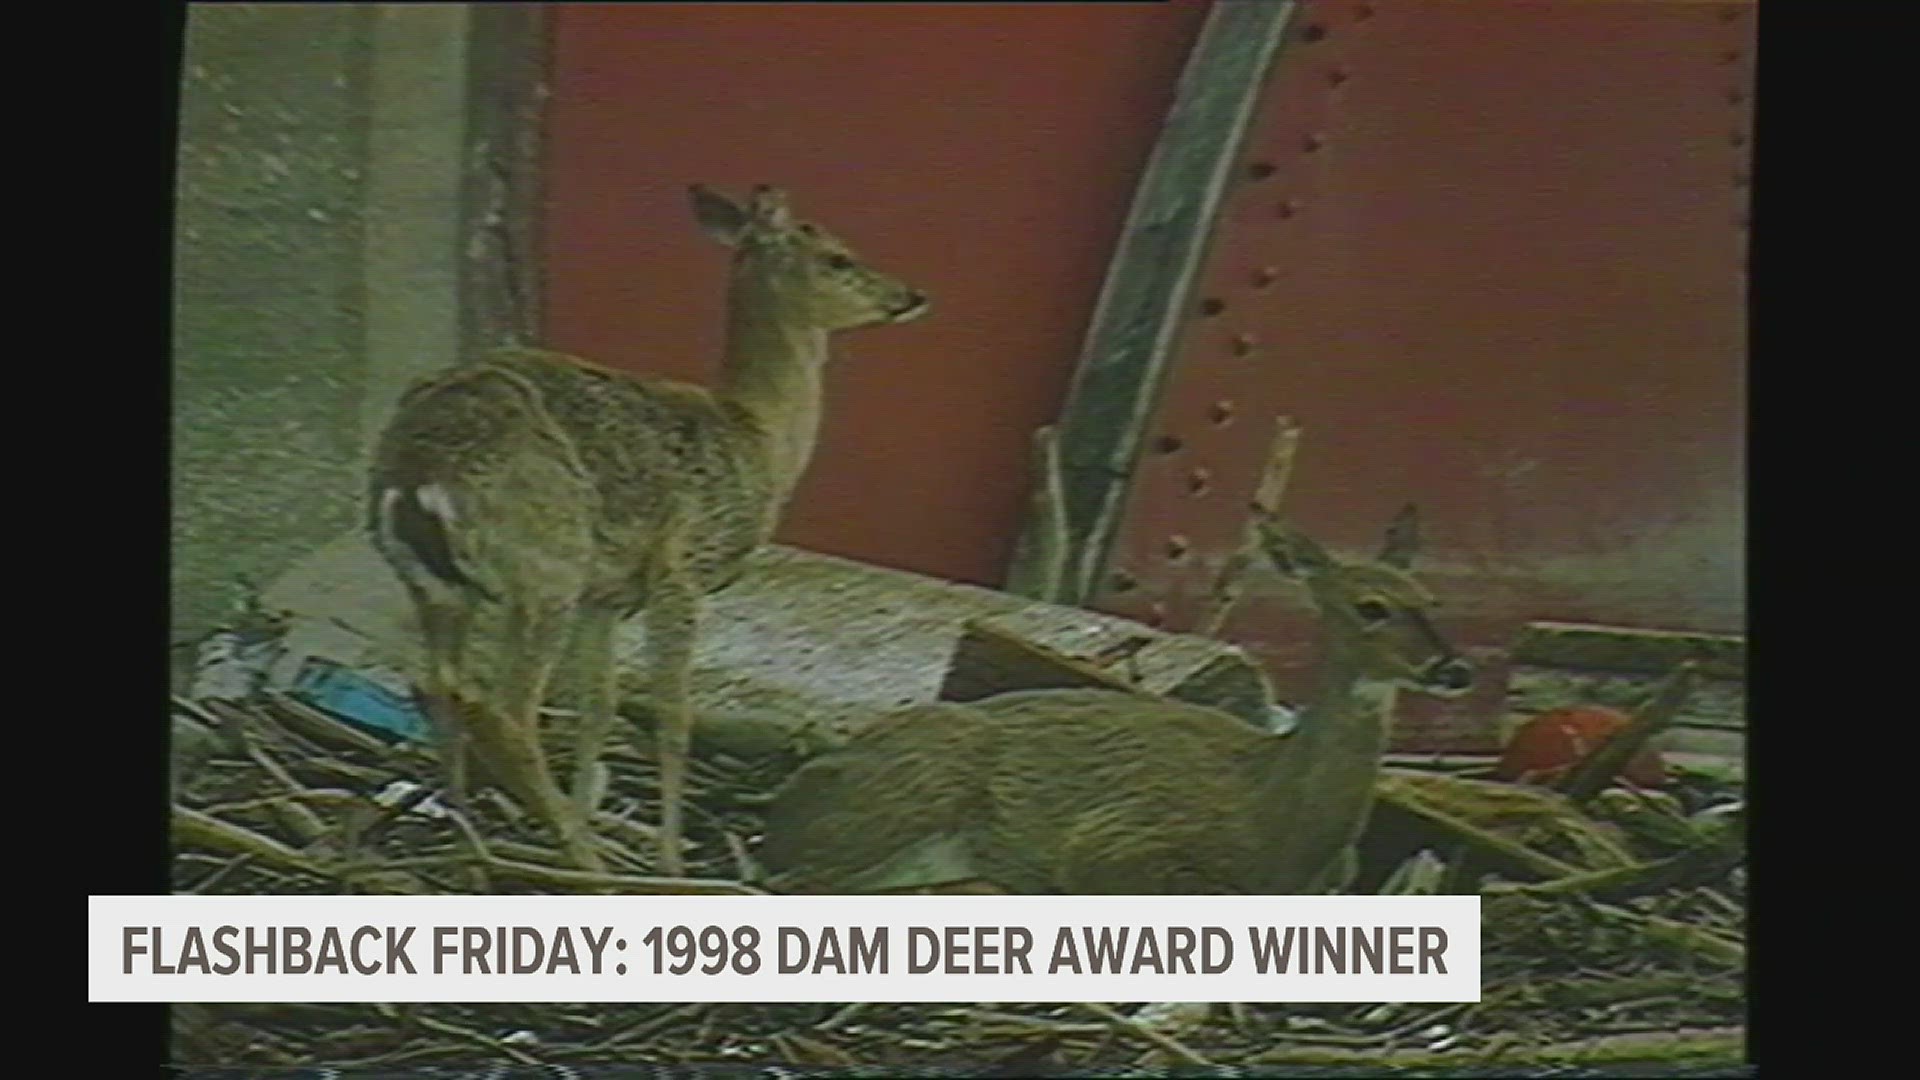 In 1988 a doe and her fawn were trapped and eventually washed down river. All captured in this flashback Friday highlight.